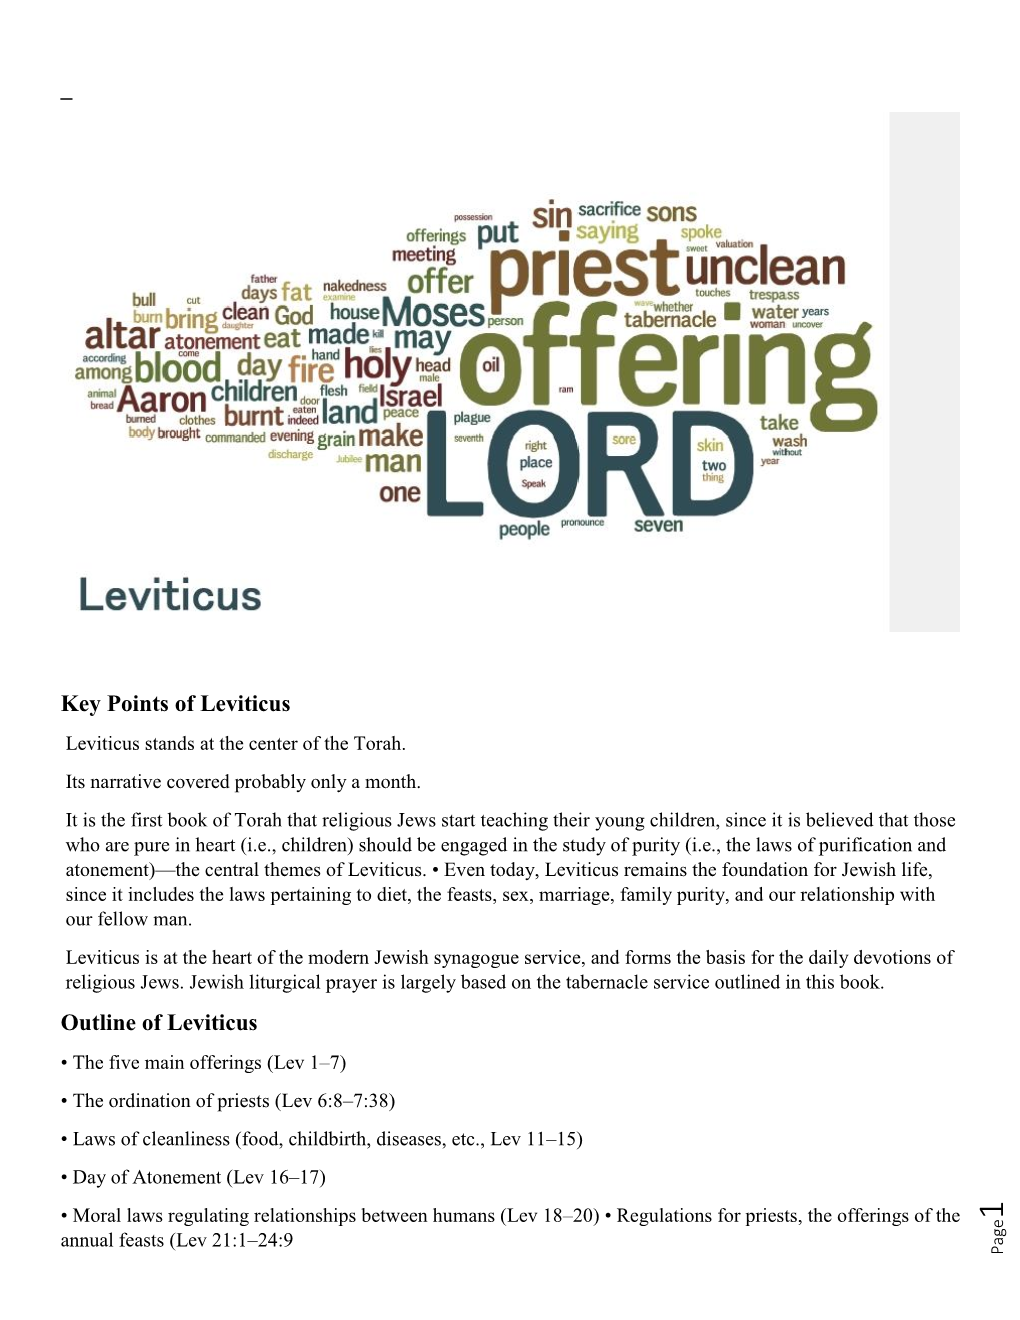 – Key Points of Leviticus Outline of Leviticus